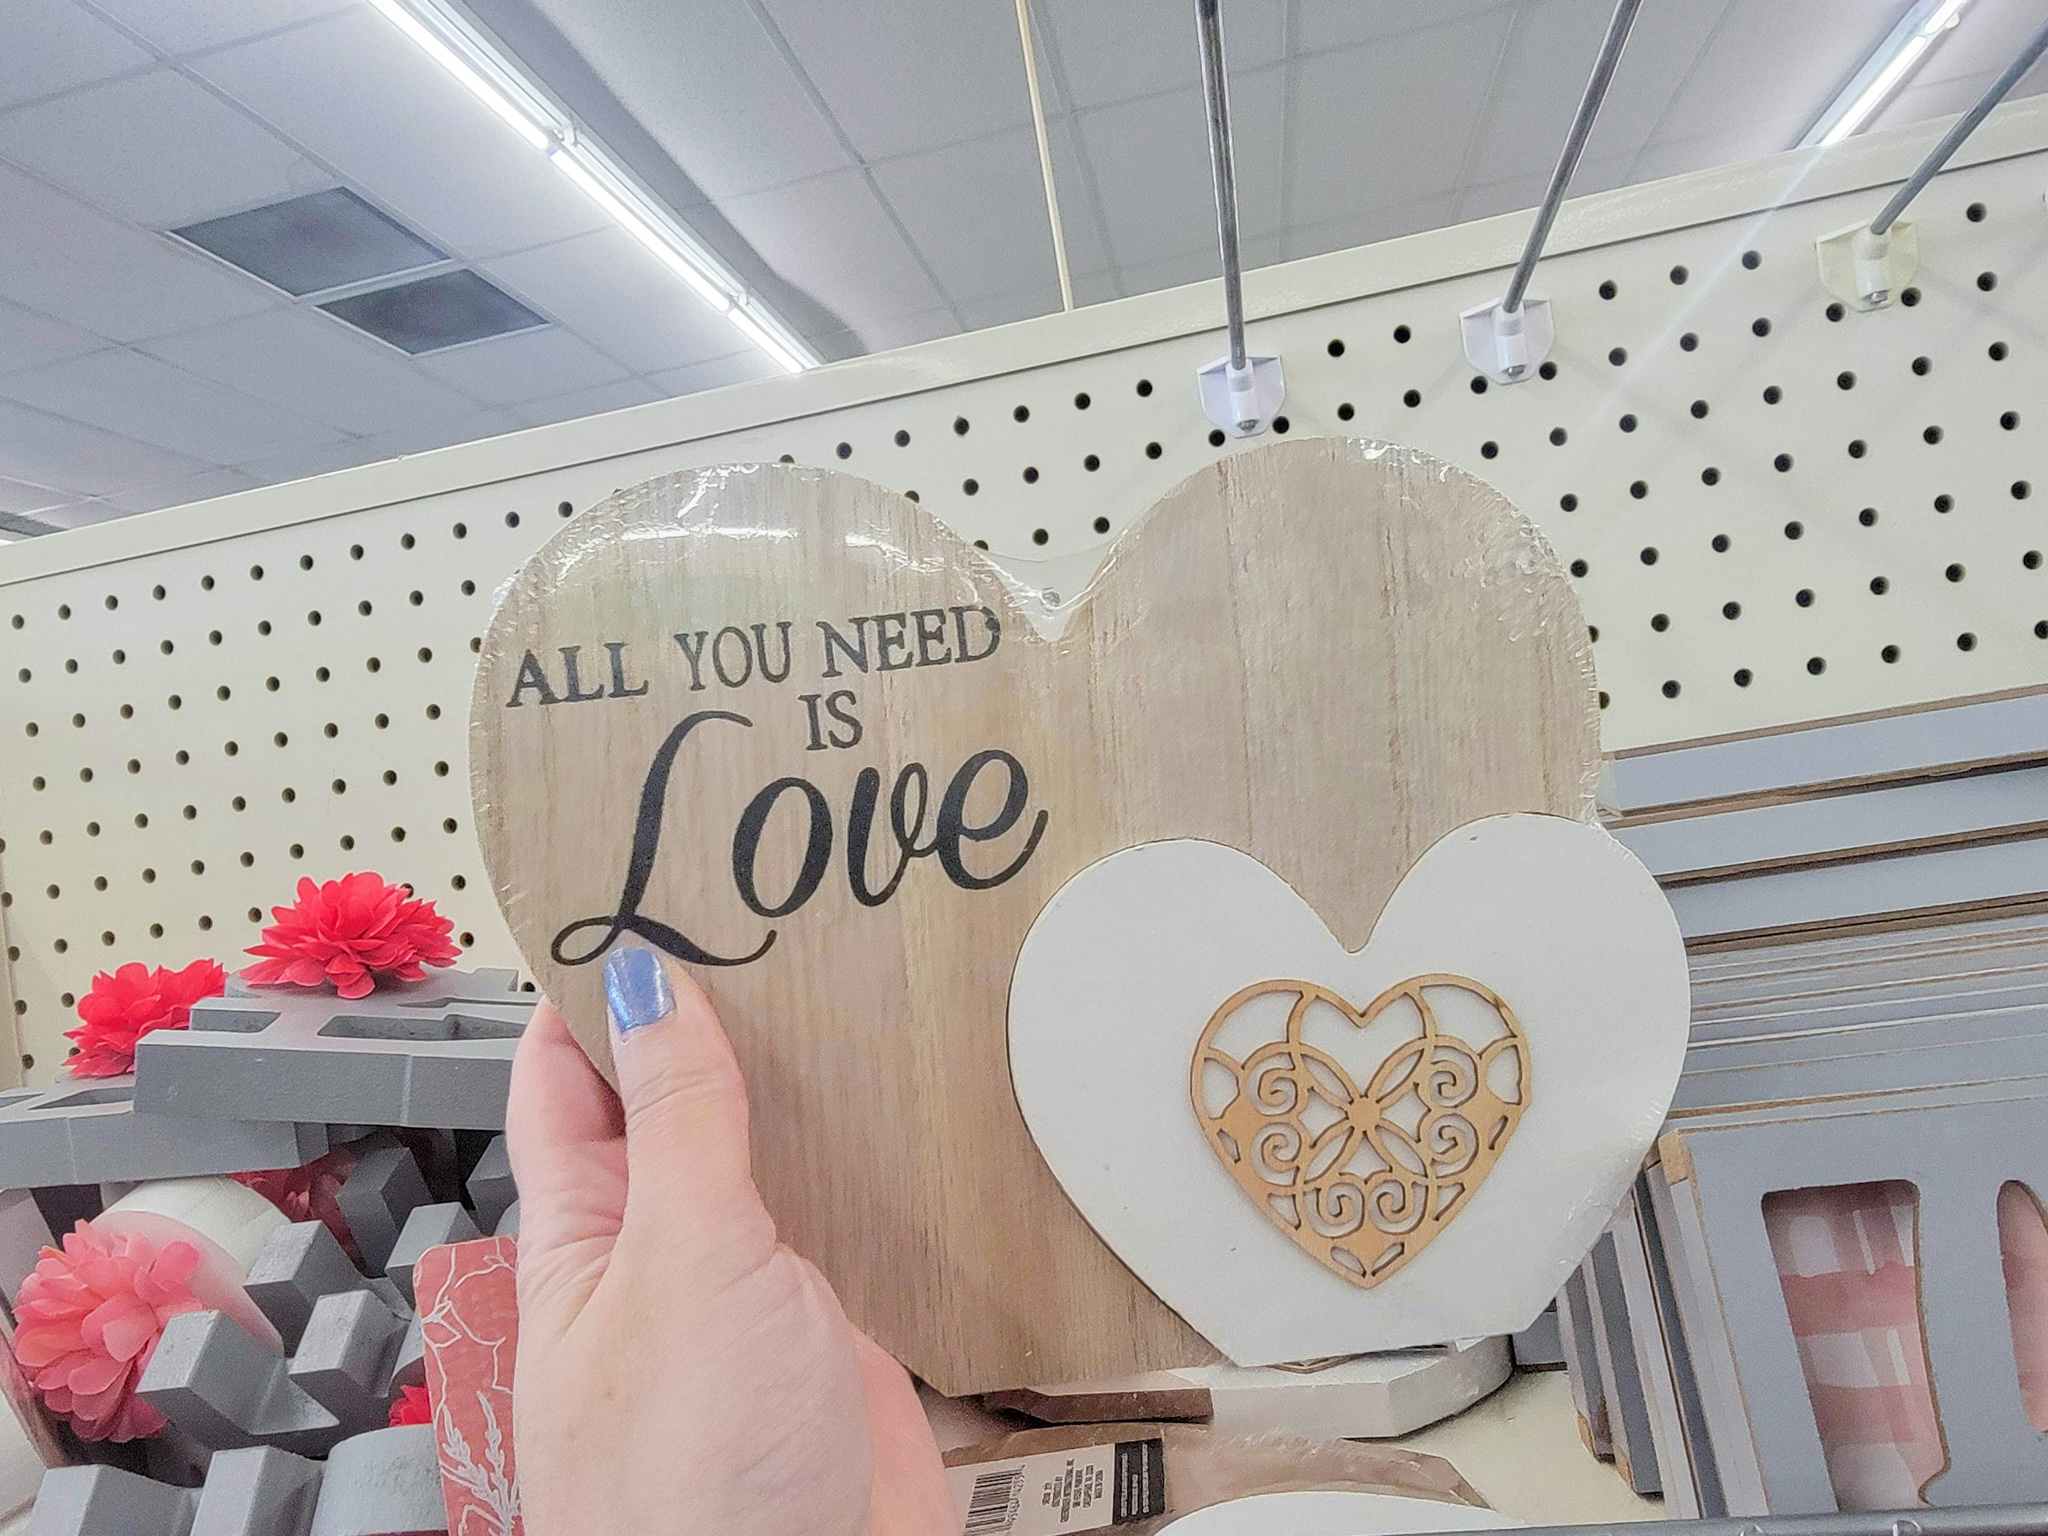 hand holding a wooden heart that says "all you need is love